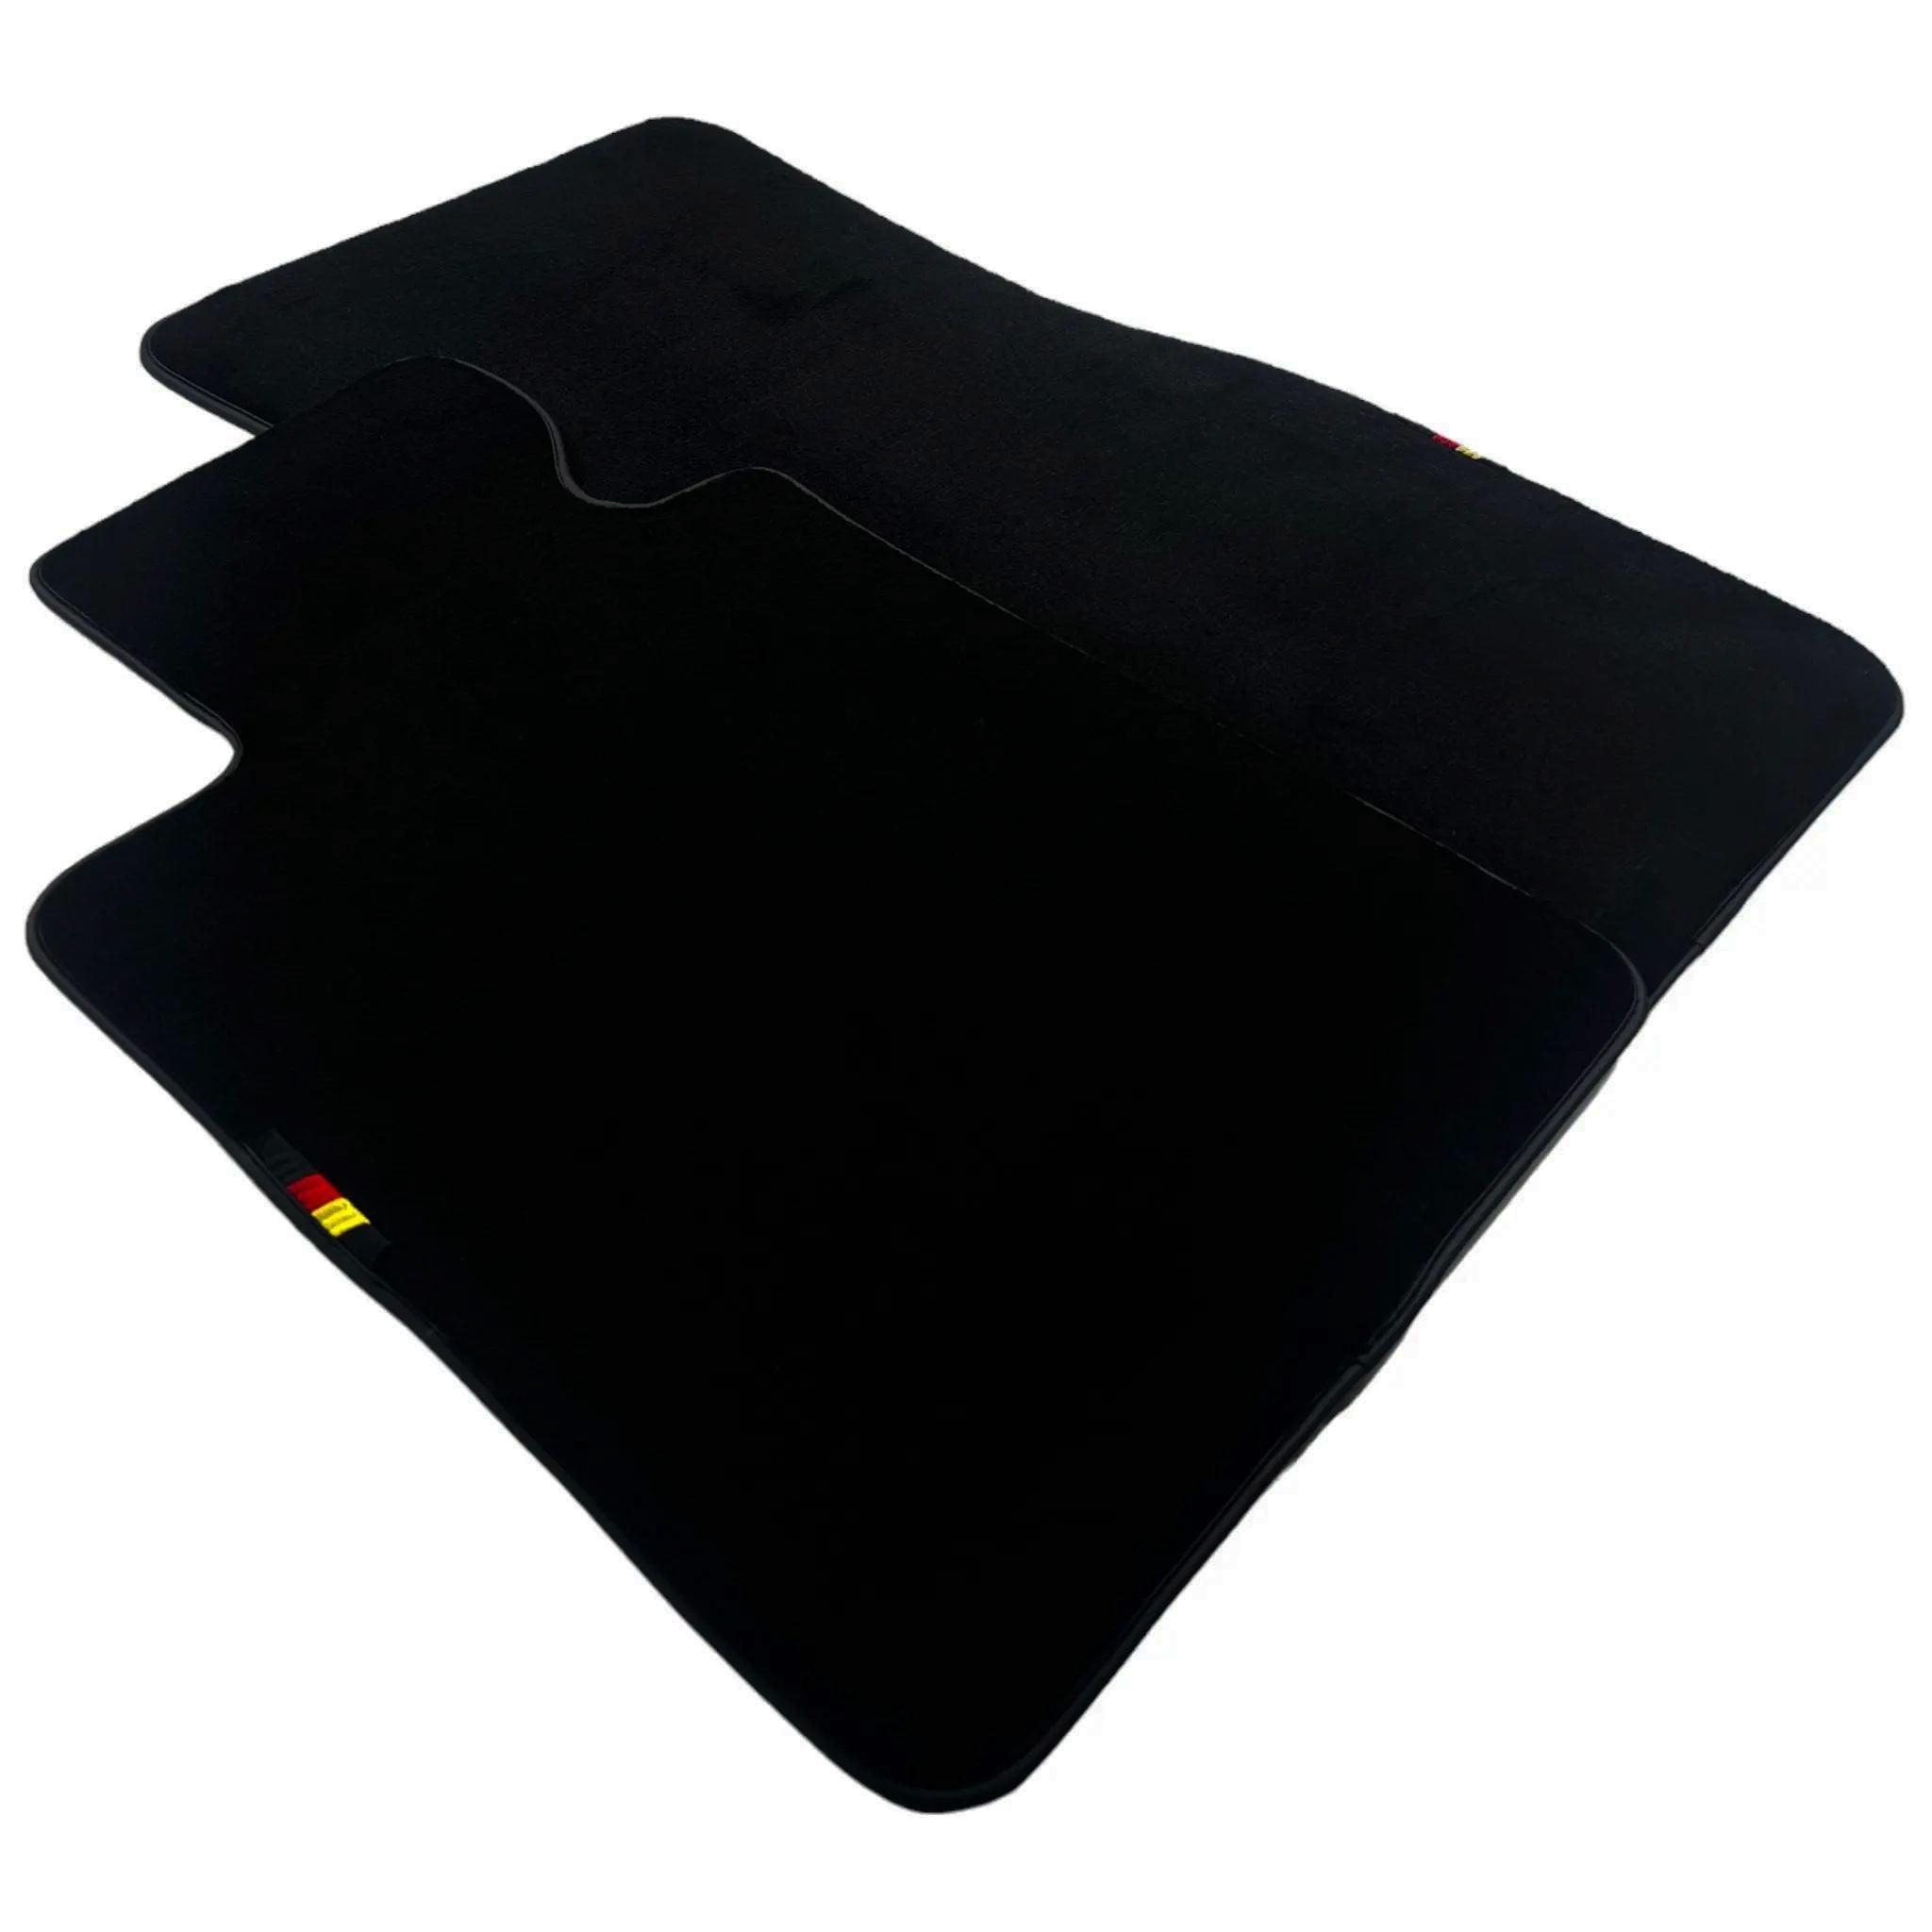 Black Floor Mats For BMW 5 Series G30 with German Flag